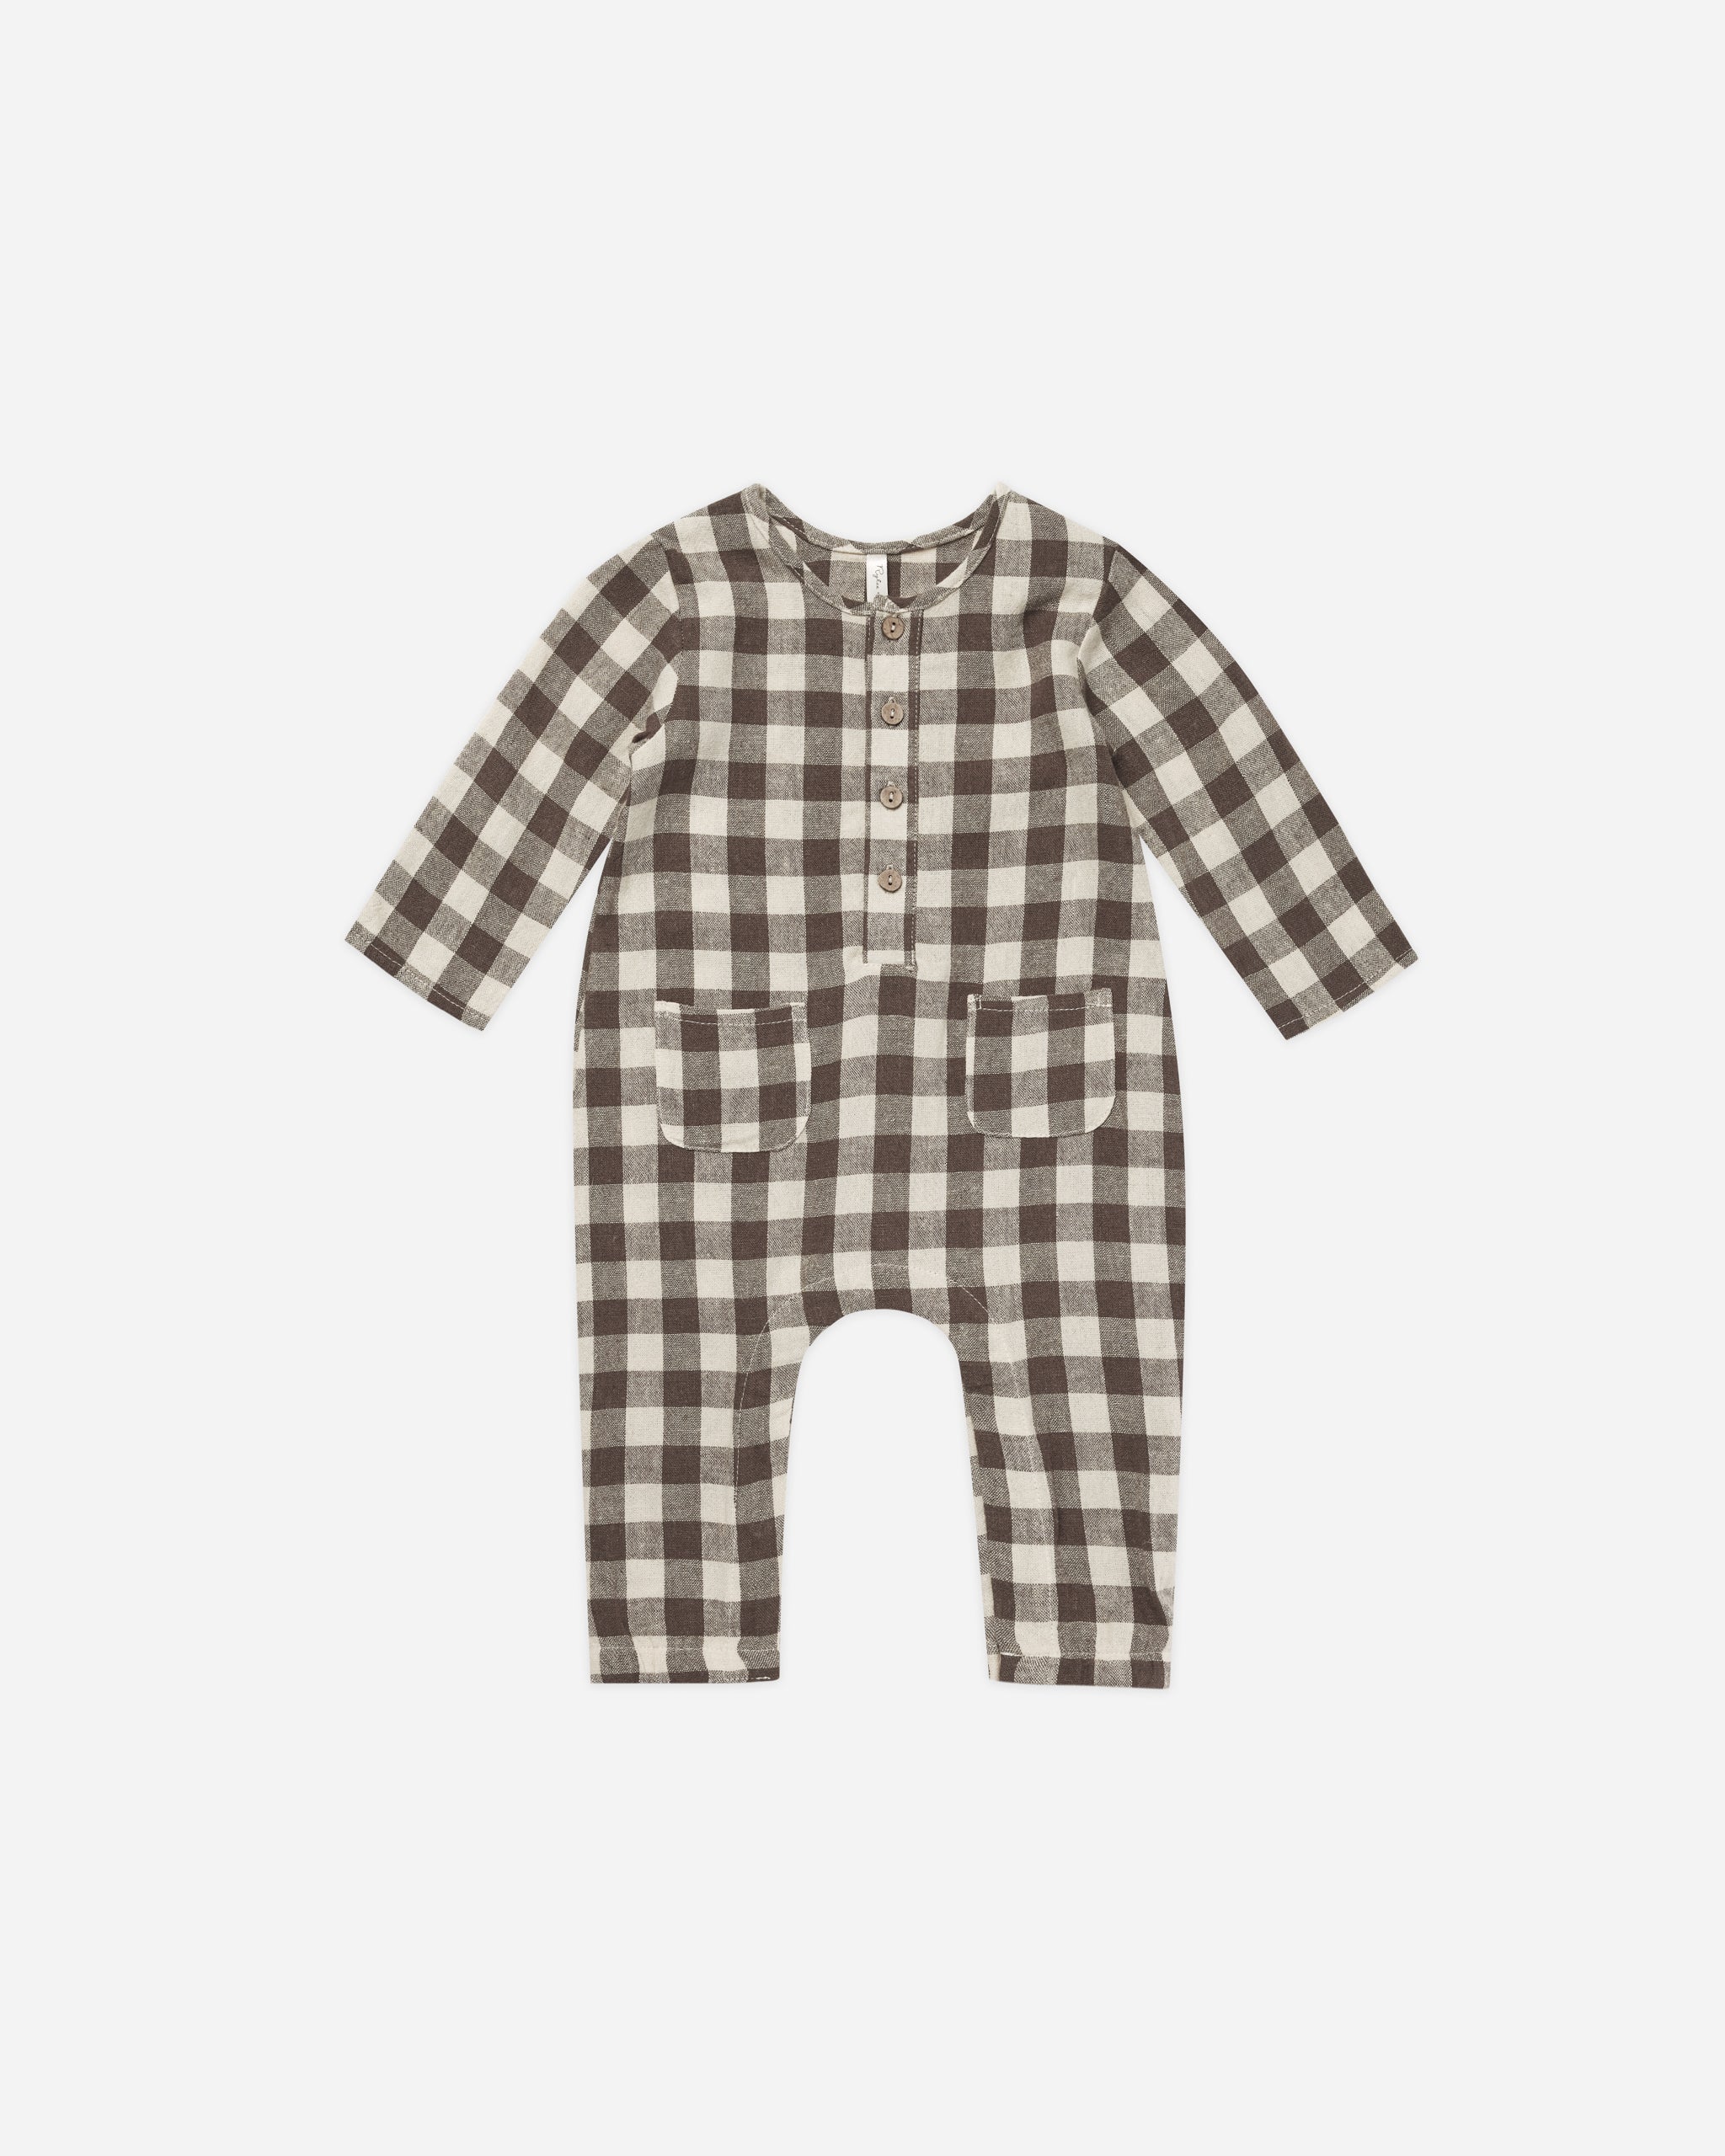 Long Sleeve Woven Jumpsuit || Charcoal Check - Rylee + Cru | Kids Clothes | Trendy Baby Clothes | Modern Infant Outfits |